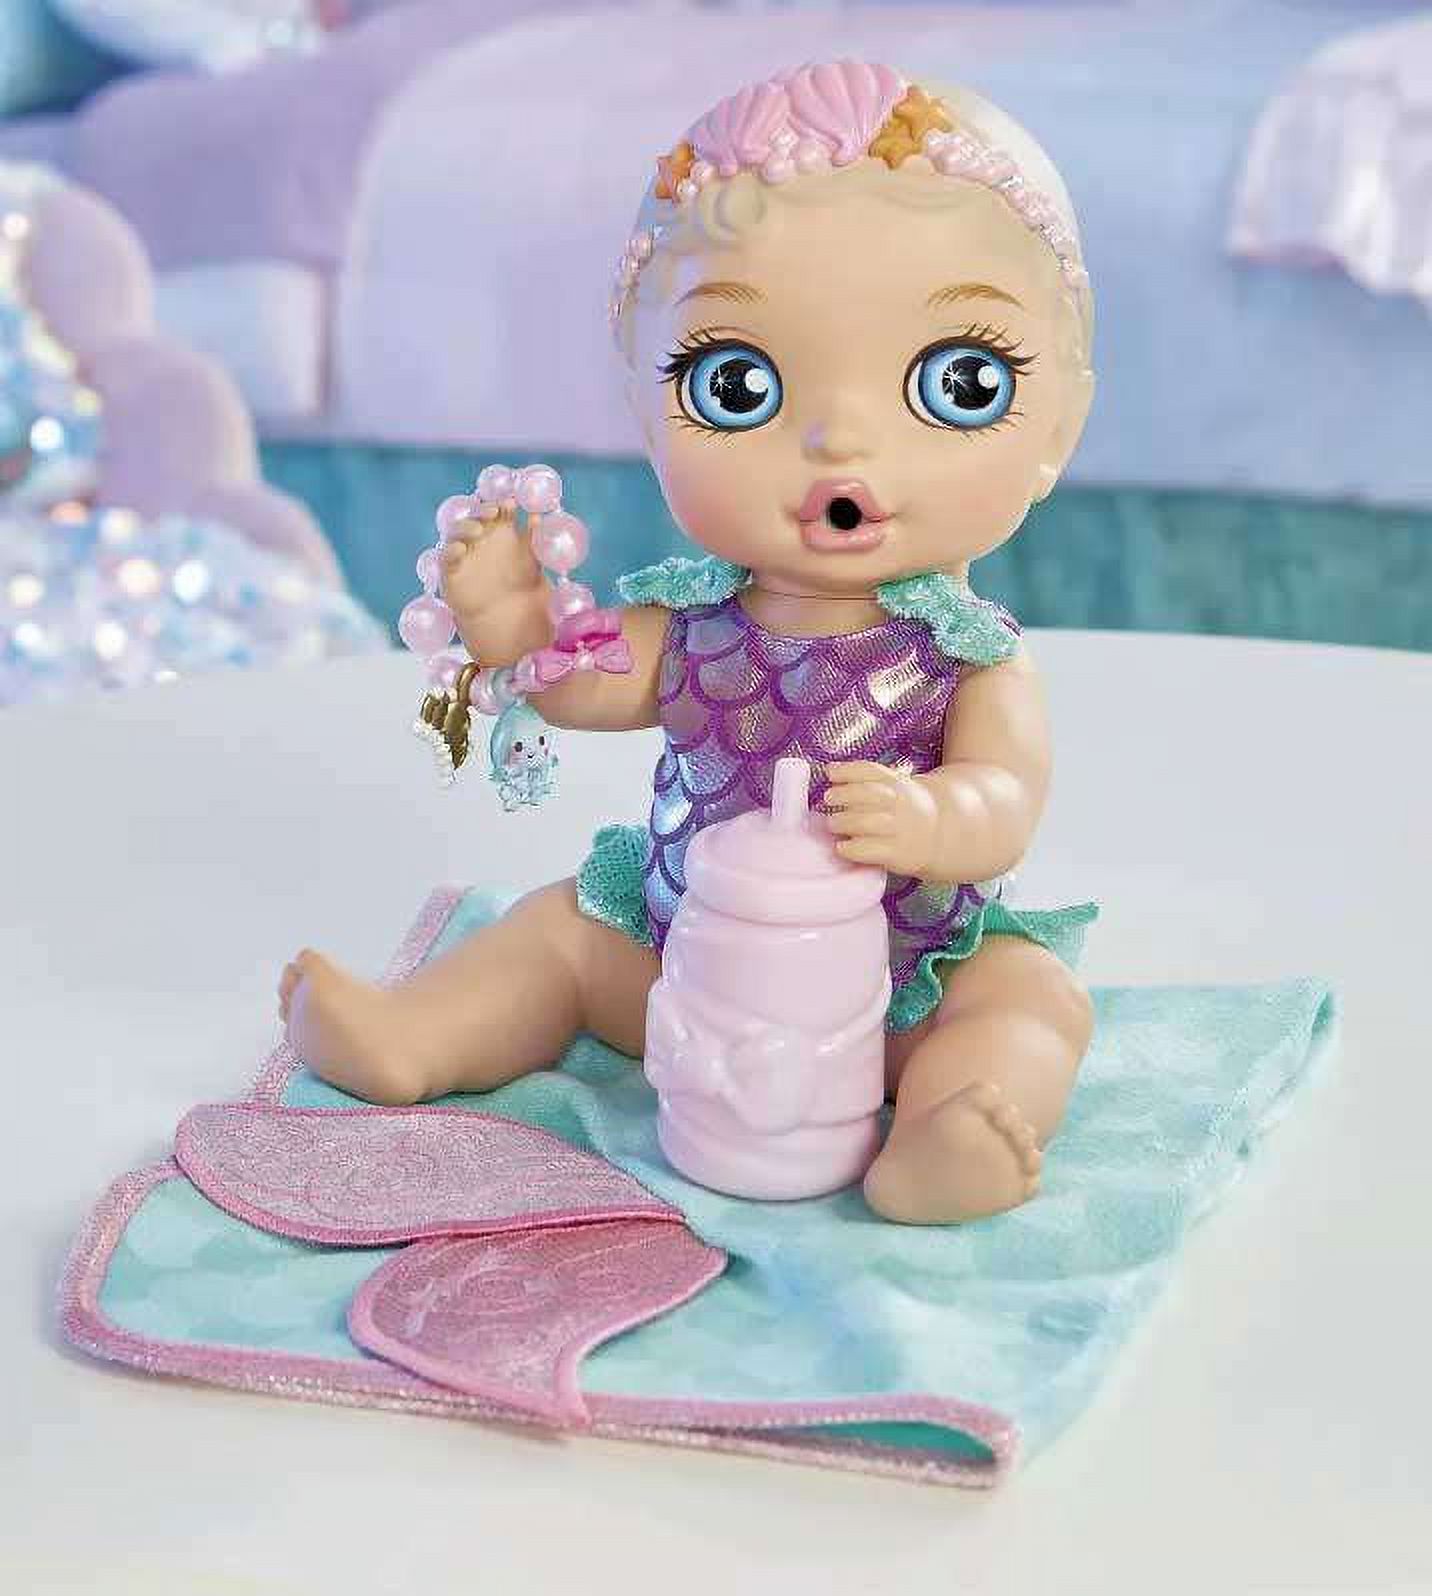 BABY born Surprise Mermaid Surprise – Baby Doll with Teal Towel and 20+ Surprises - image 5 of 6